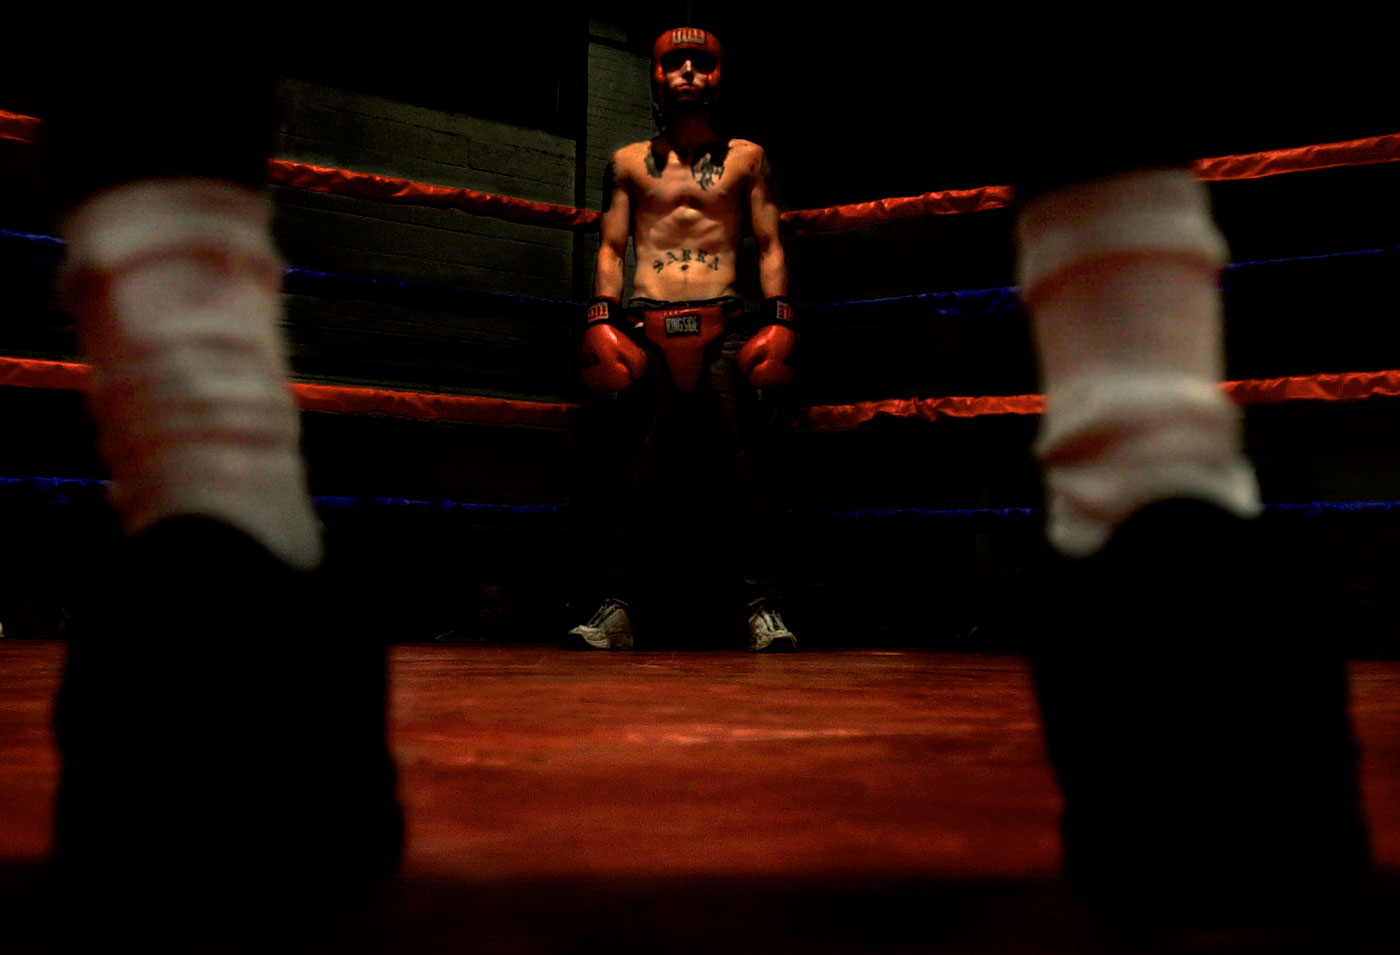 Andy Bookman waits for his fight to start. He has fought in several {quote}Tuff Man{quote} competitions.